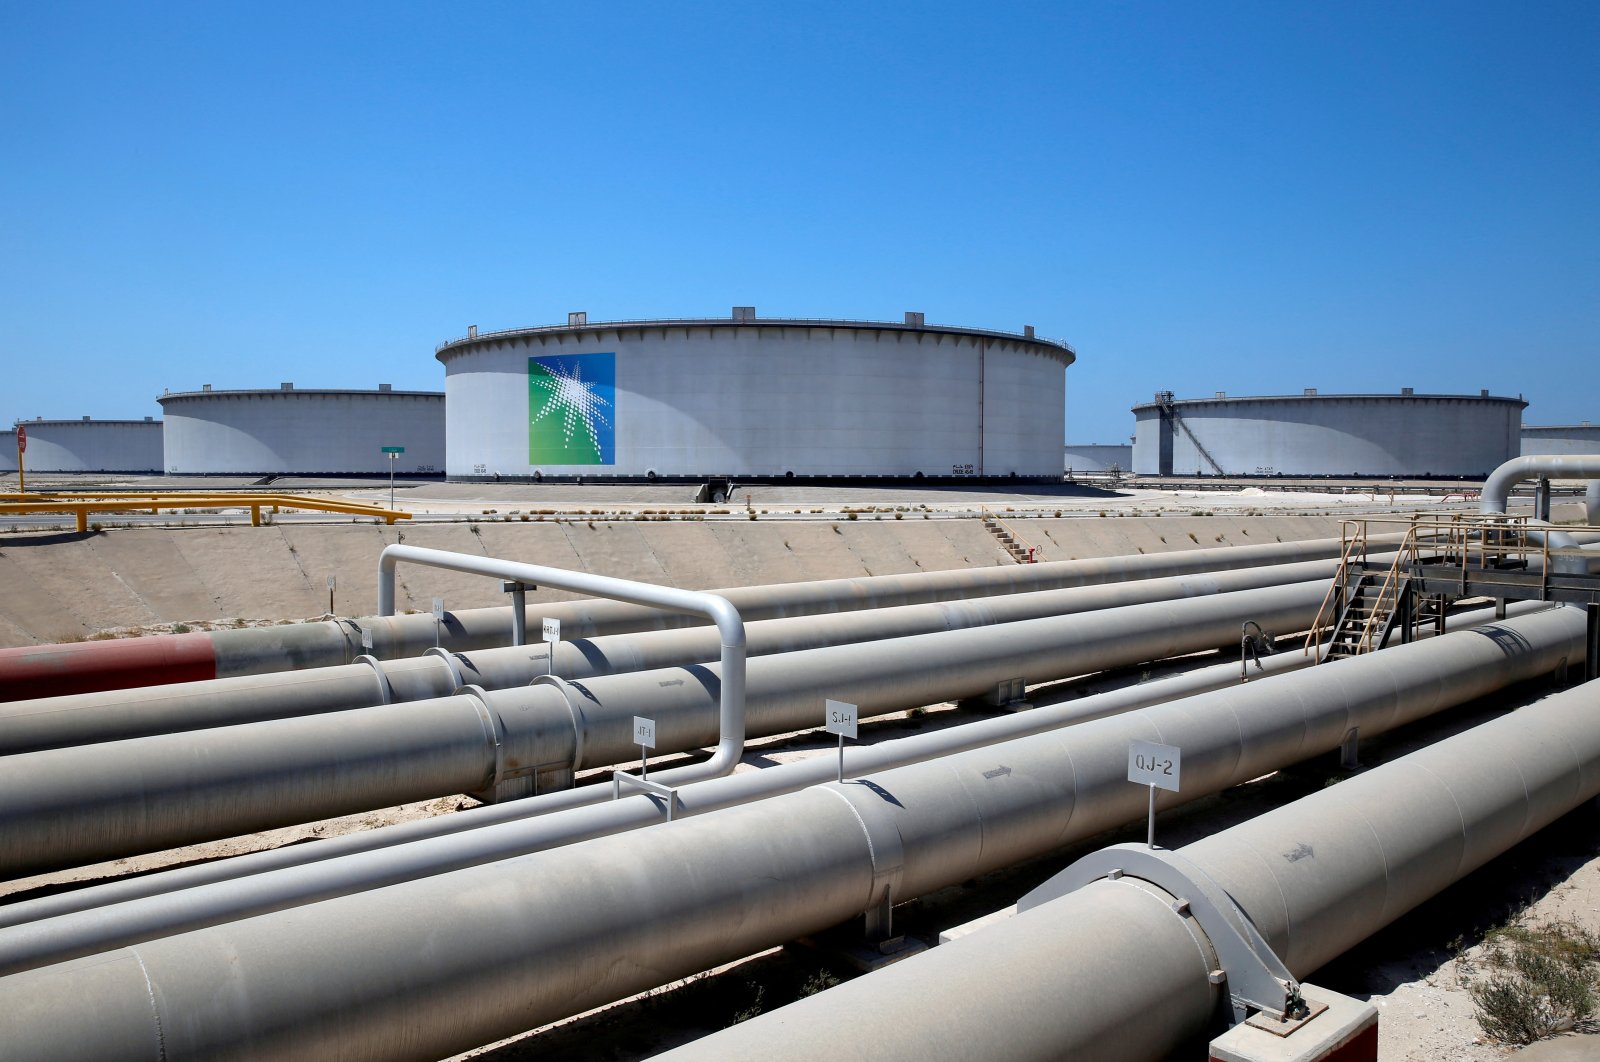 General view of tanks and an oil pipe at a Saudi Aramco oil refinery and oil terminal, Ras Tanura, Saudi Arabia, May 21, 2018. (Reuters Photo)